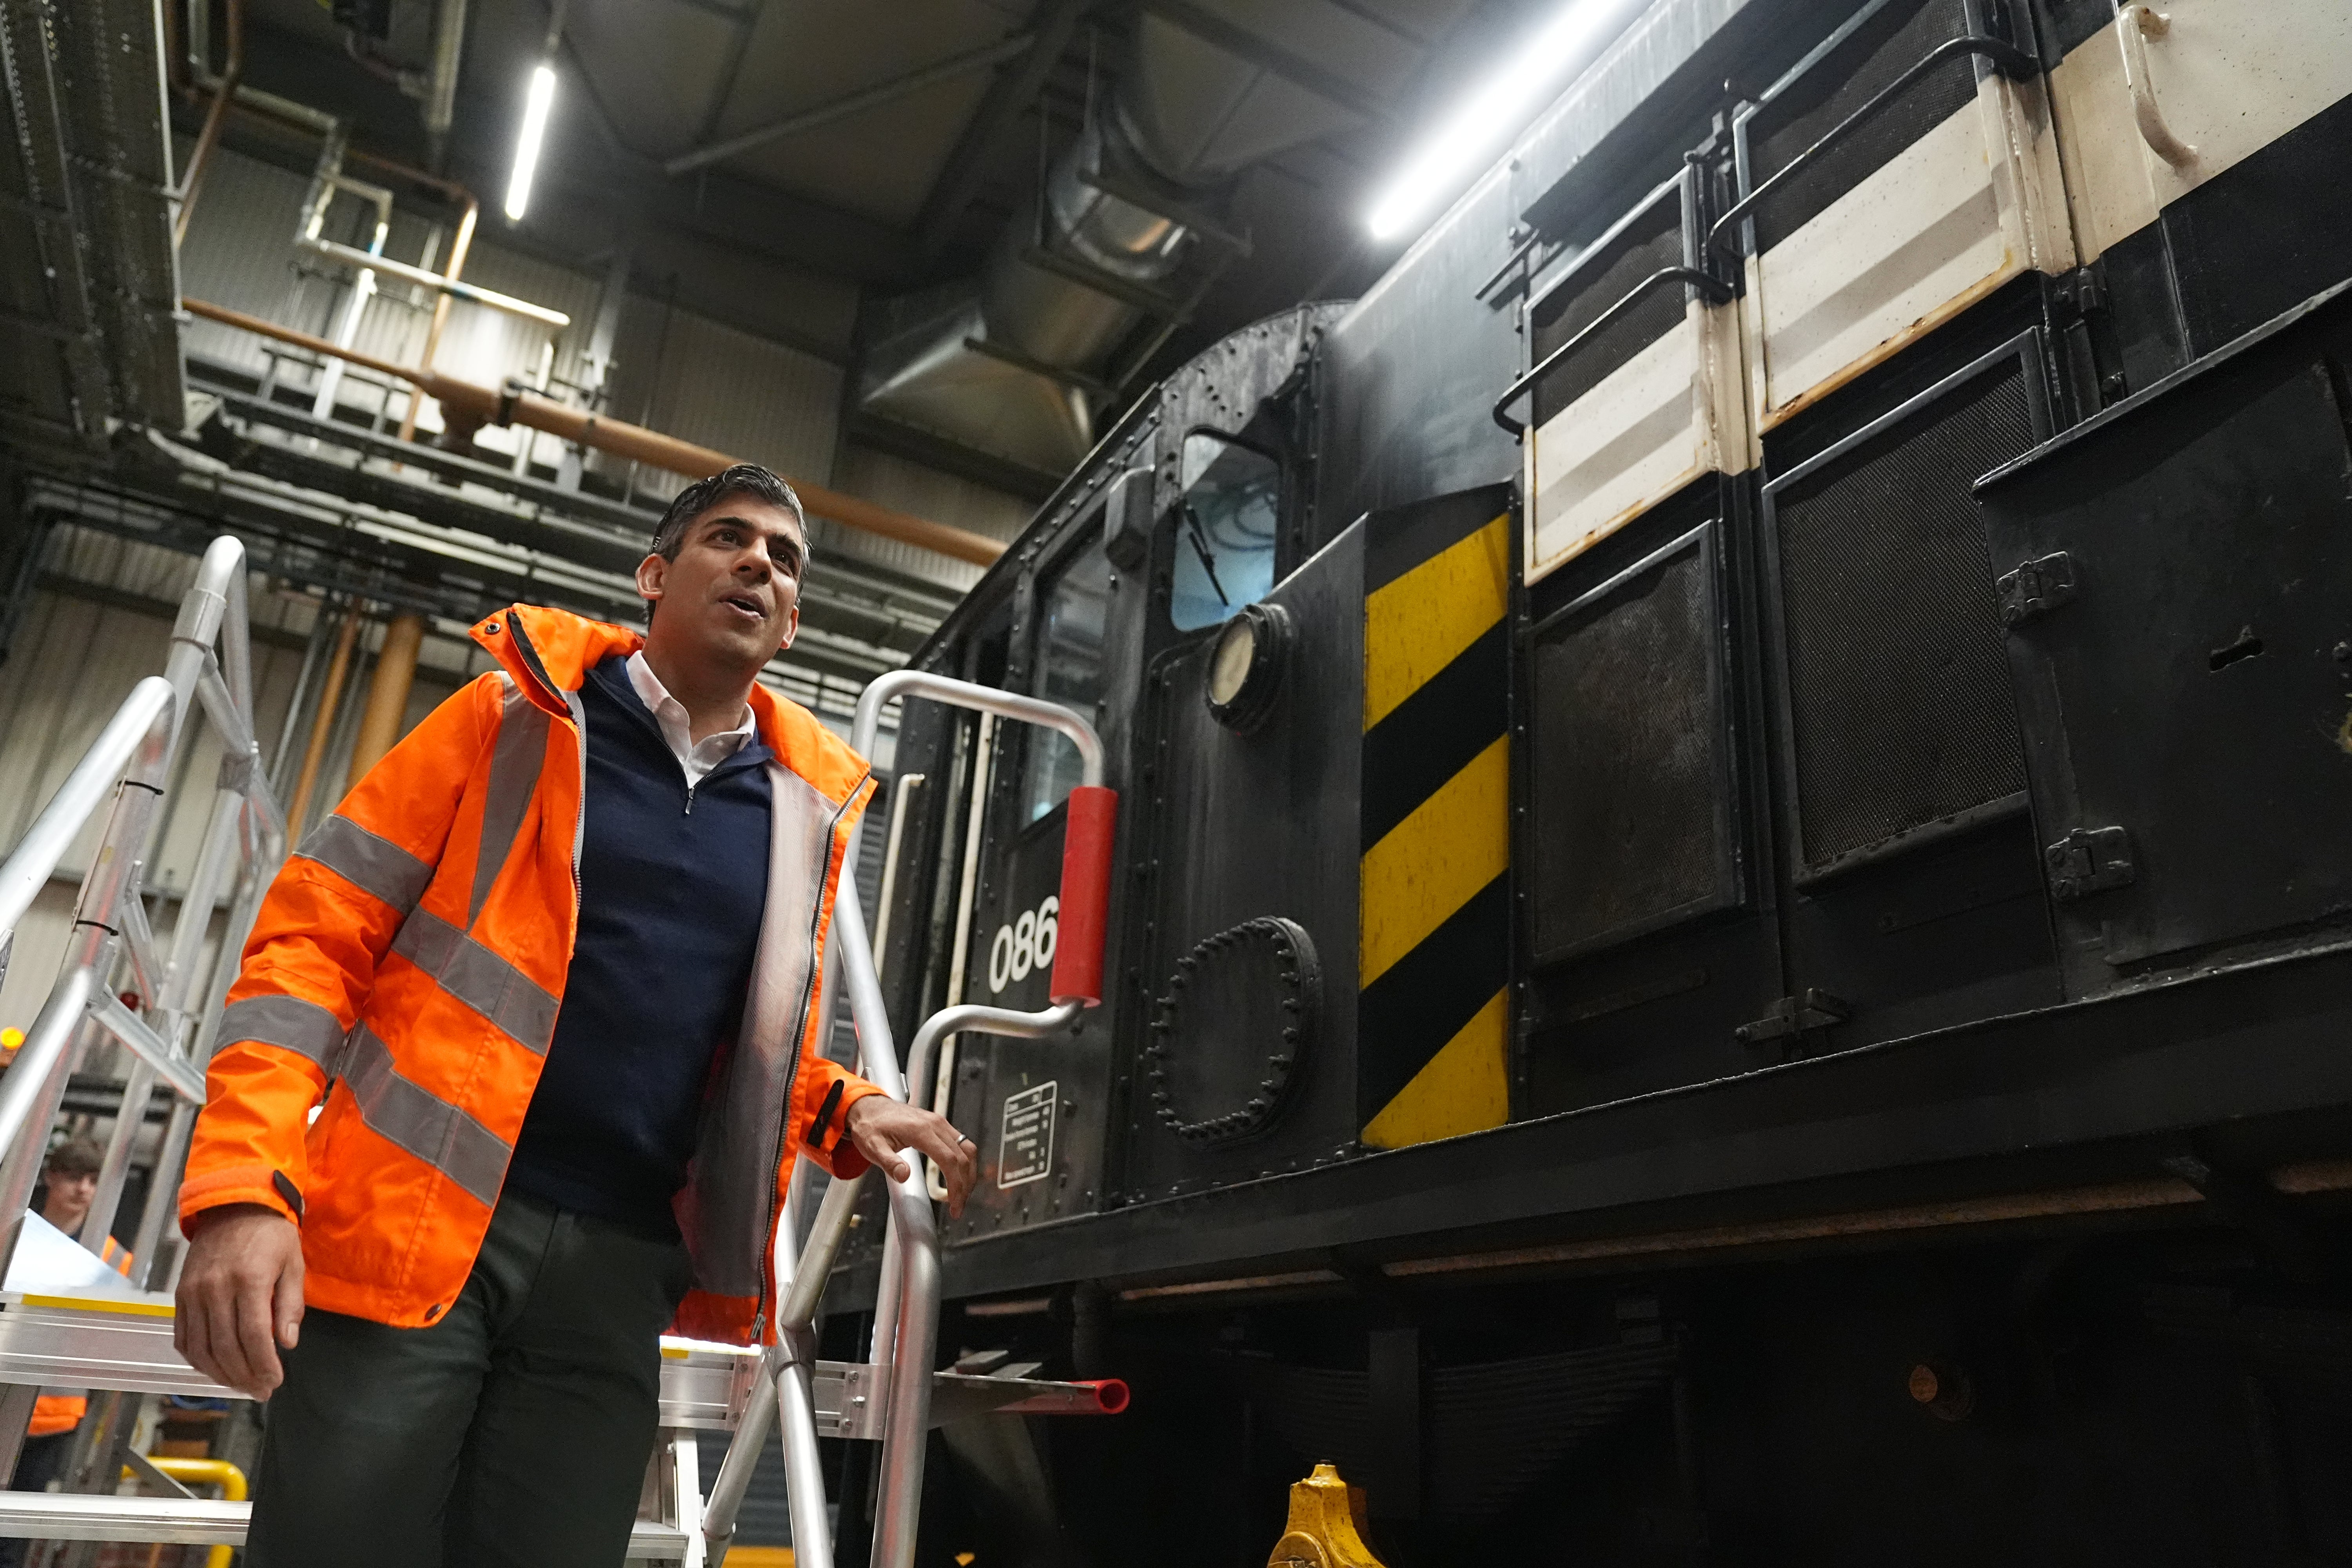 Rishi Sunak during his visit to the GWR railway traction maintenance depot in Penzance